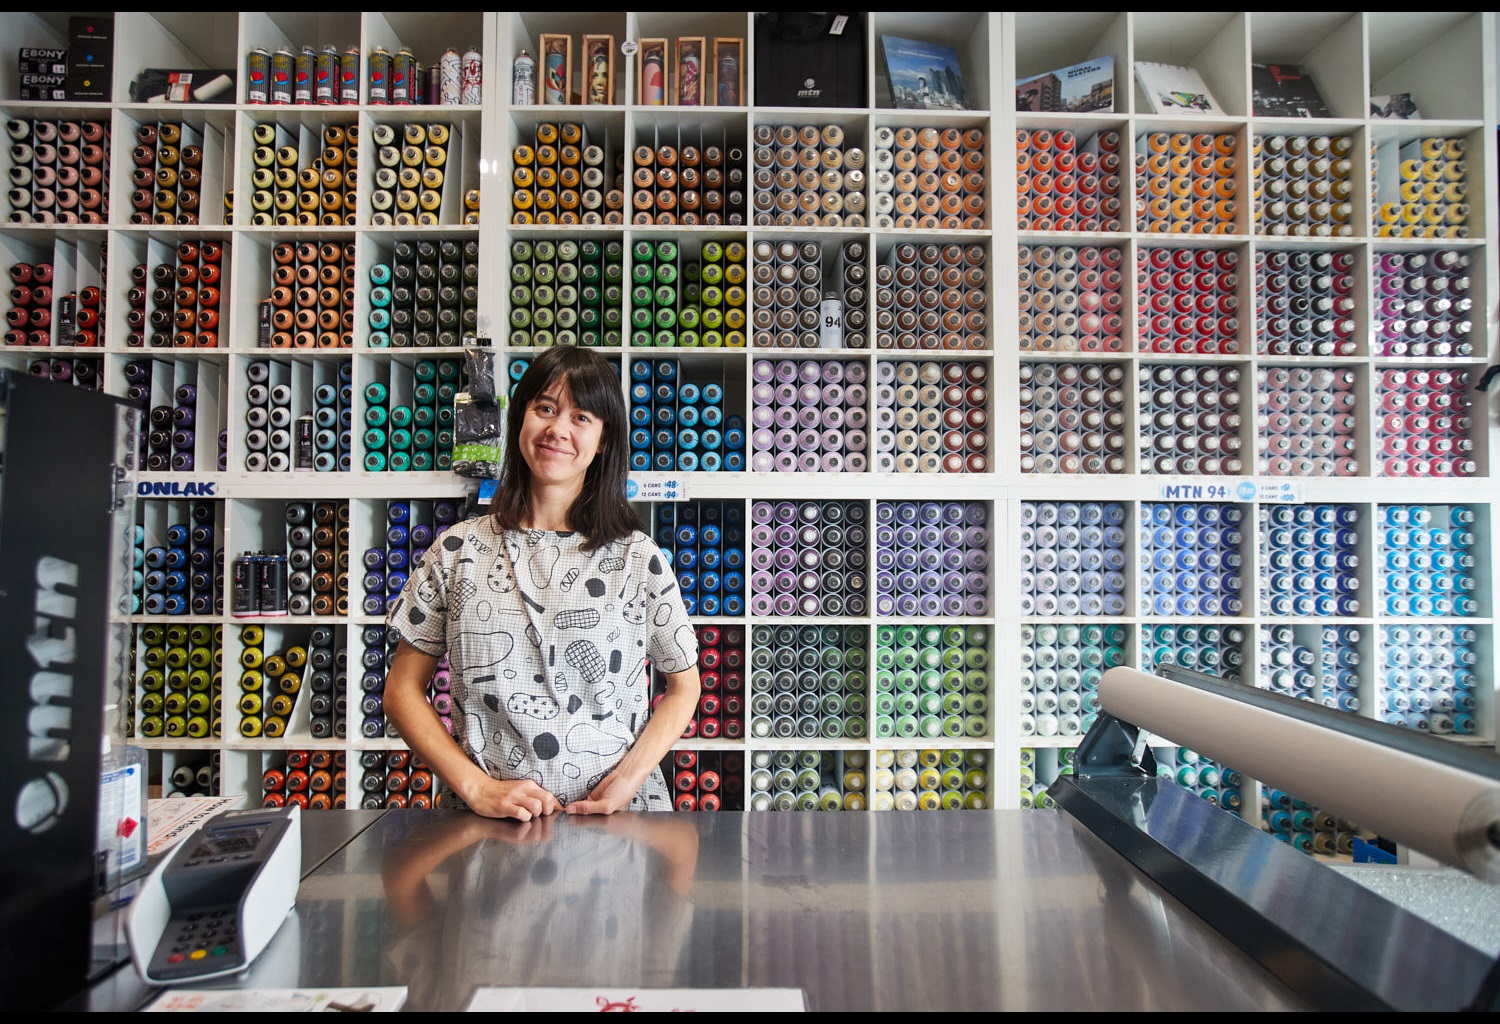 The Butcher Shop sales assistant stands in front of wall of paint